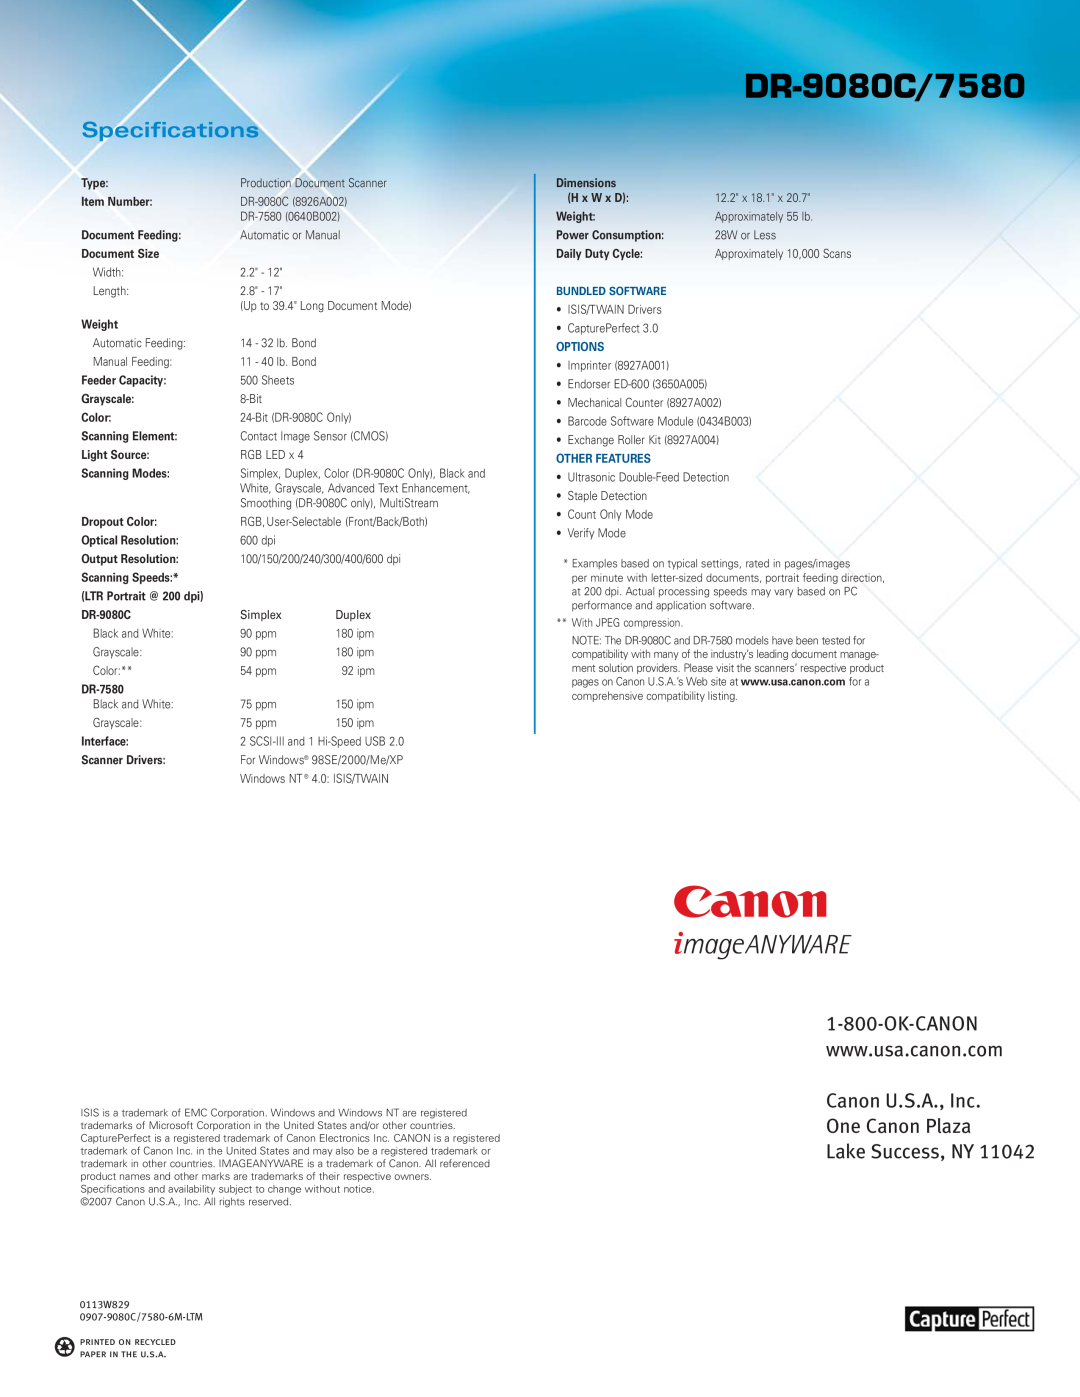 Canon DR-9080C manual Specifications, Canon U.S.A., Inc One Canon Plaza Lake Success, NY, Bundled Software, Options 